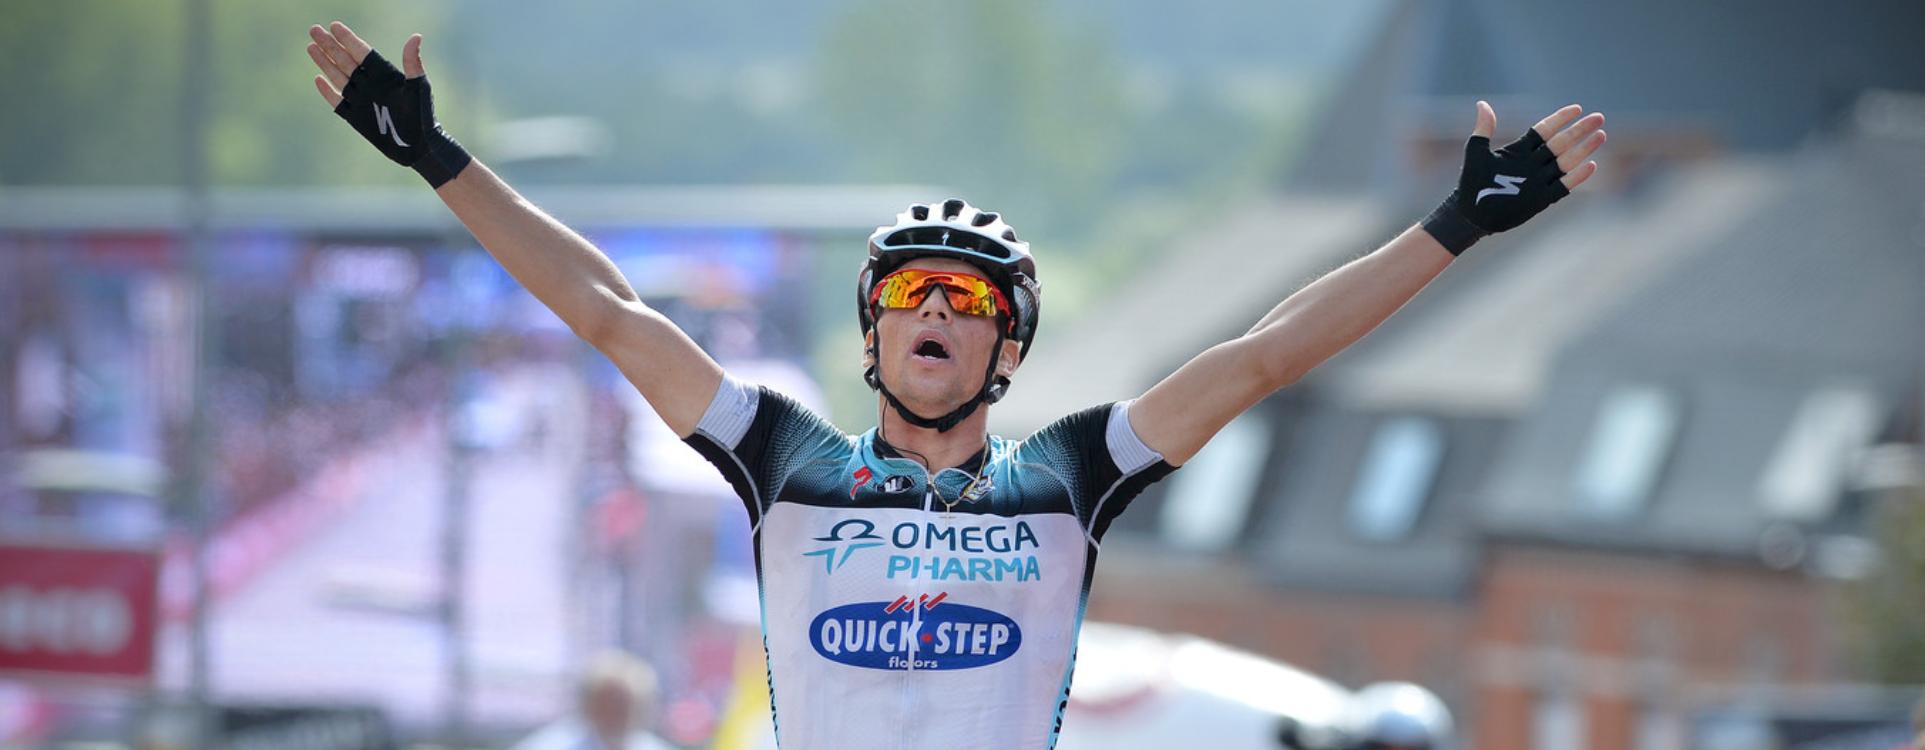 DOUBLE VICTORY IN THE ENECO TOUR!